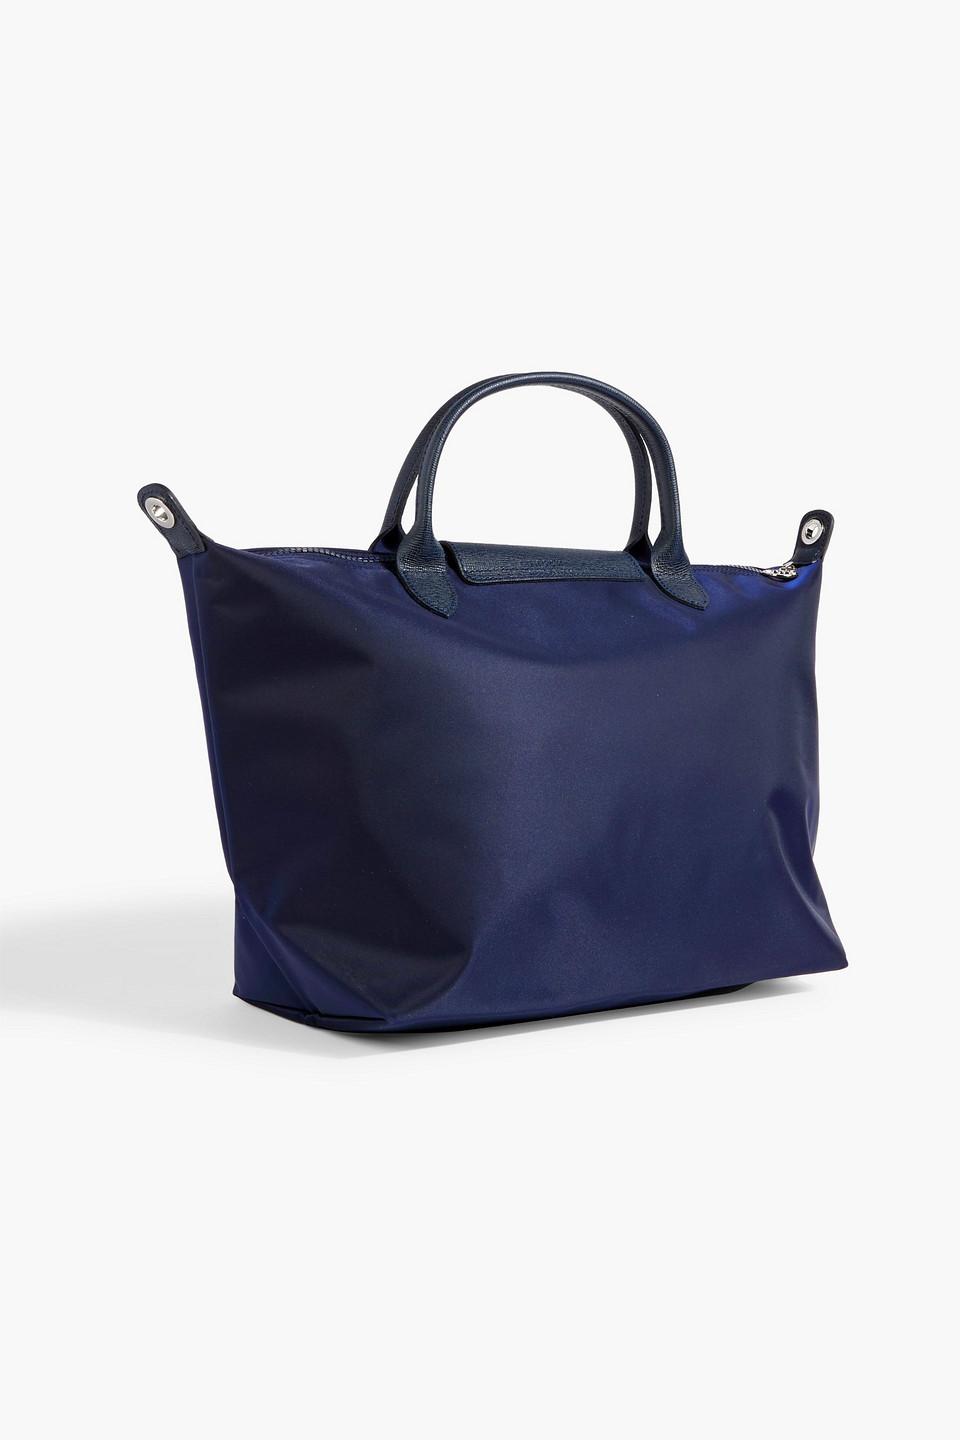 Longchamp Le Pliage Leather-trimmed Shell Tote in Blue